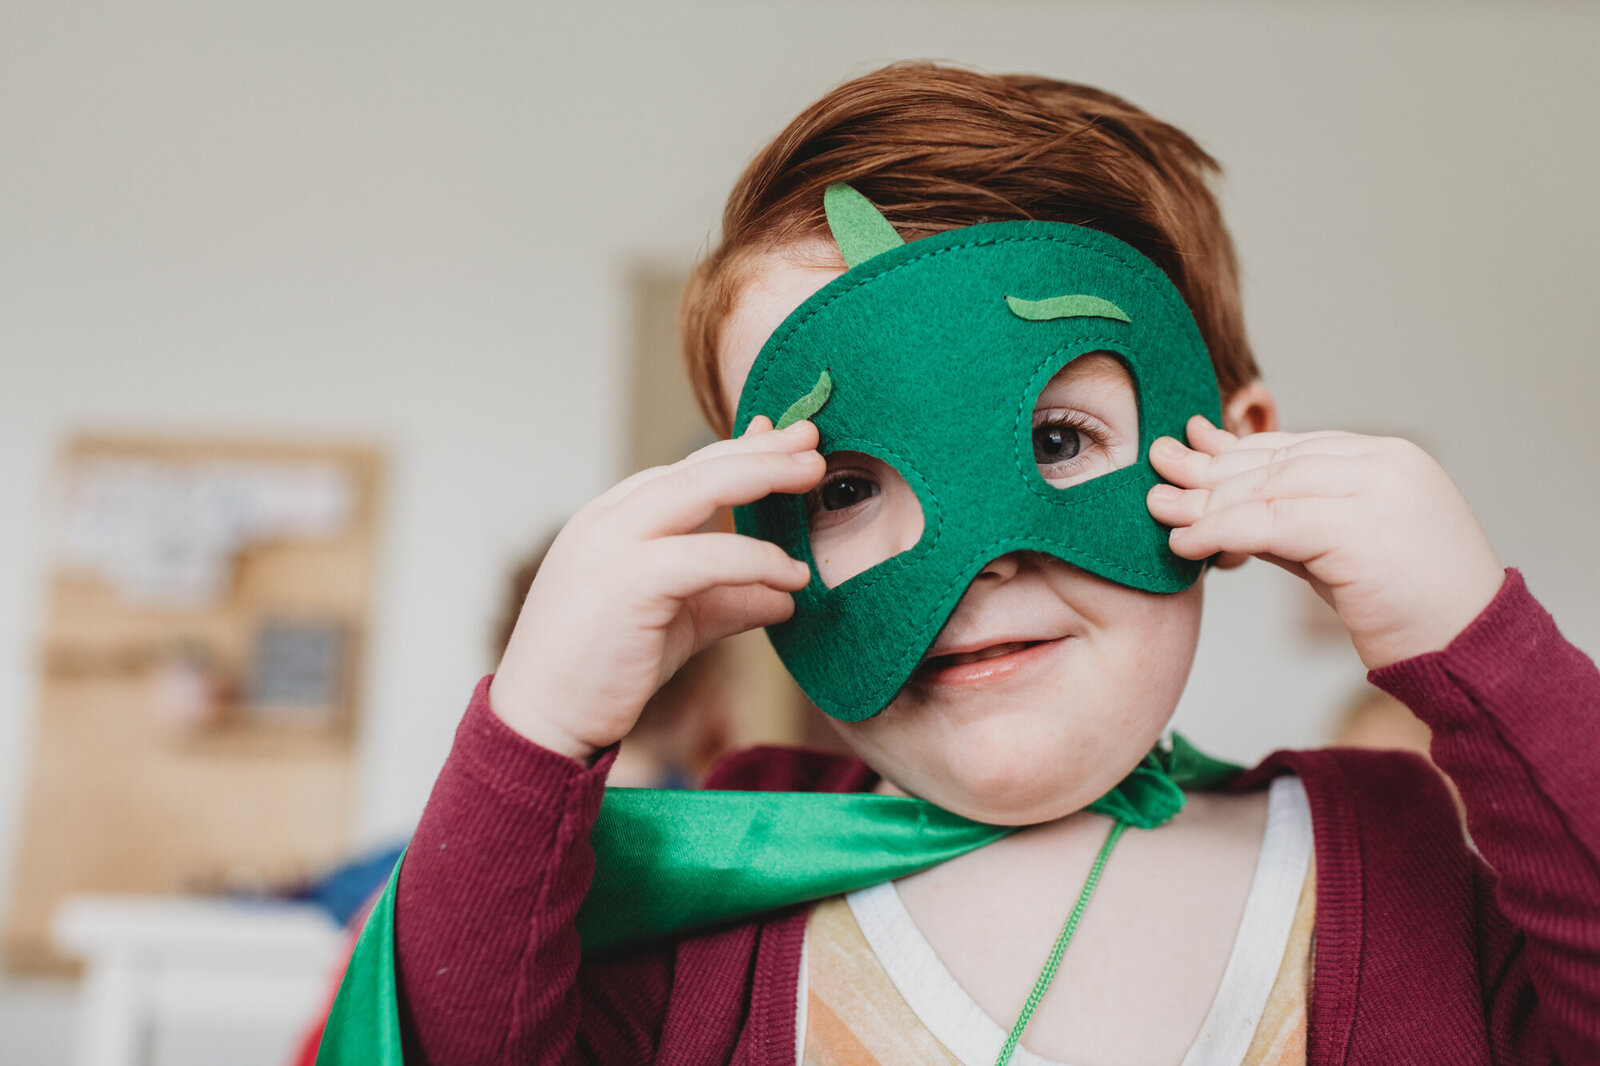 Branding Photographer,  a child is amused as he puts a costume mask over his face